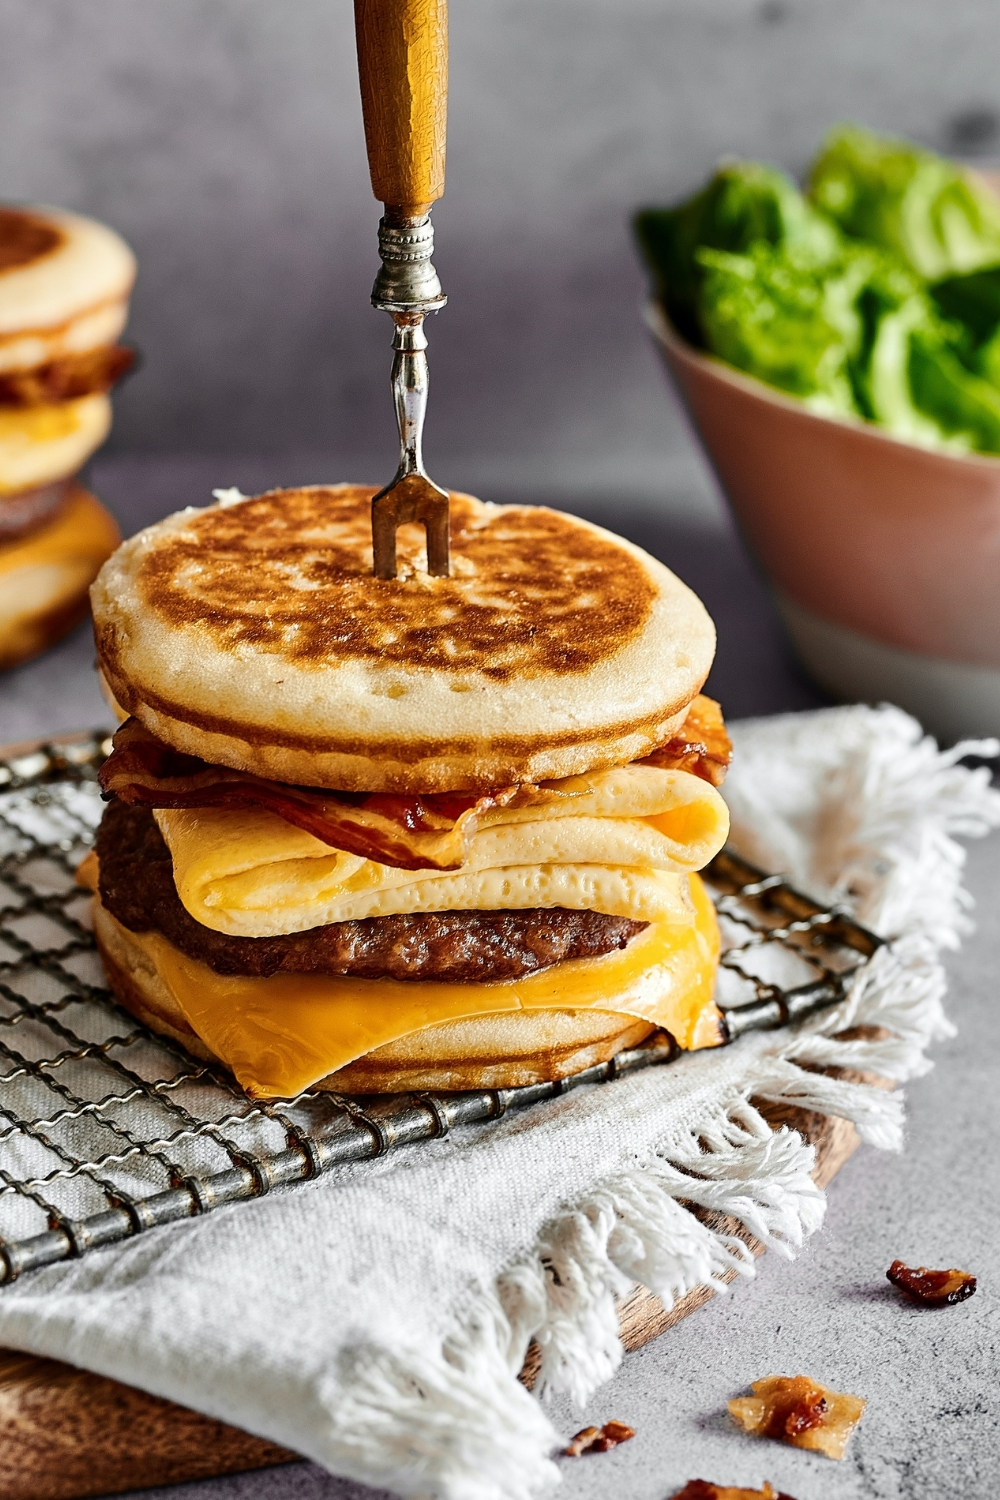 A McGriddle with a pitch fork through sticking out of the top of it. The McGriddle is on a wire rack that is on a white table cloth covering a wooden board on a gray counter. Behind it is part of another McGriddle and to the right of that is part of a bowl of lettuce.